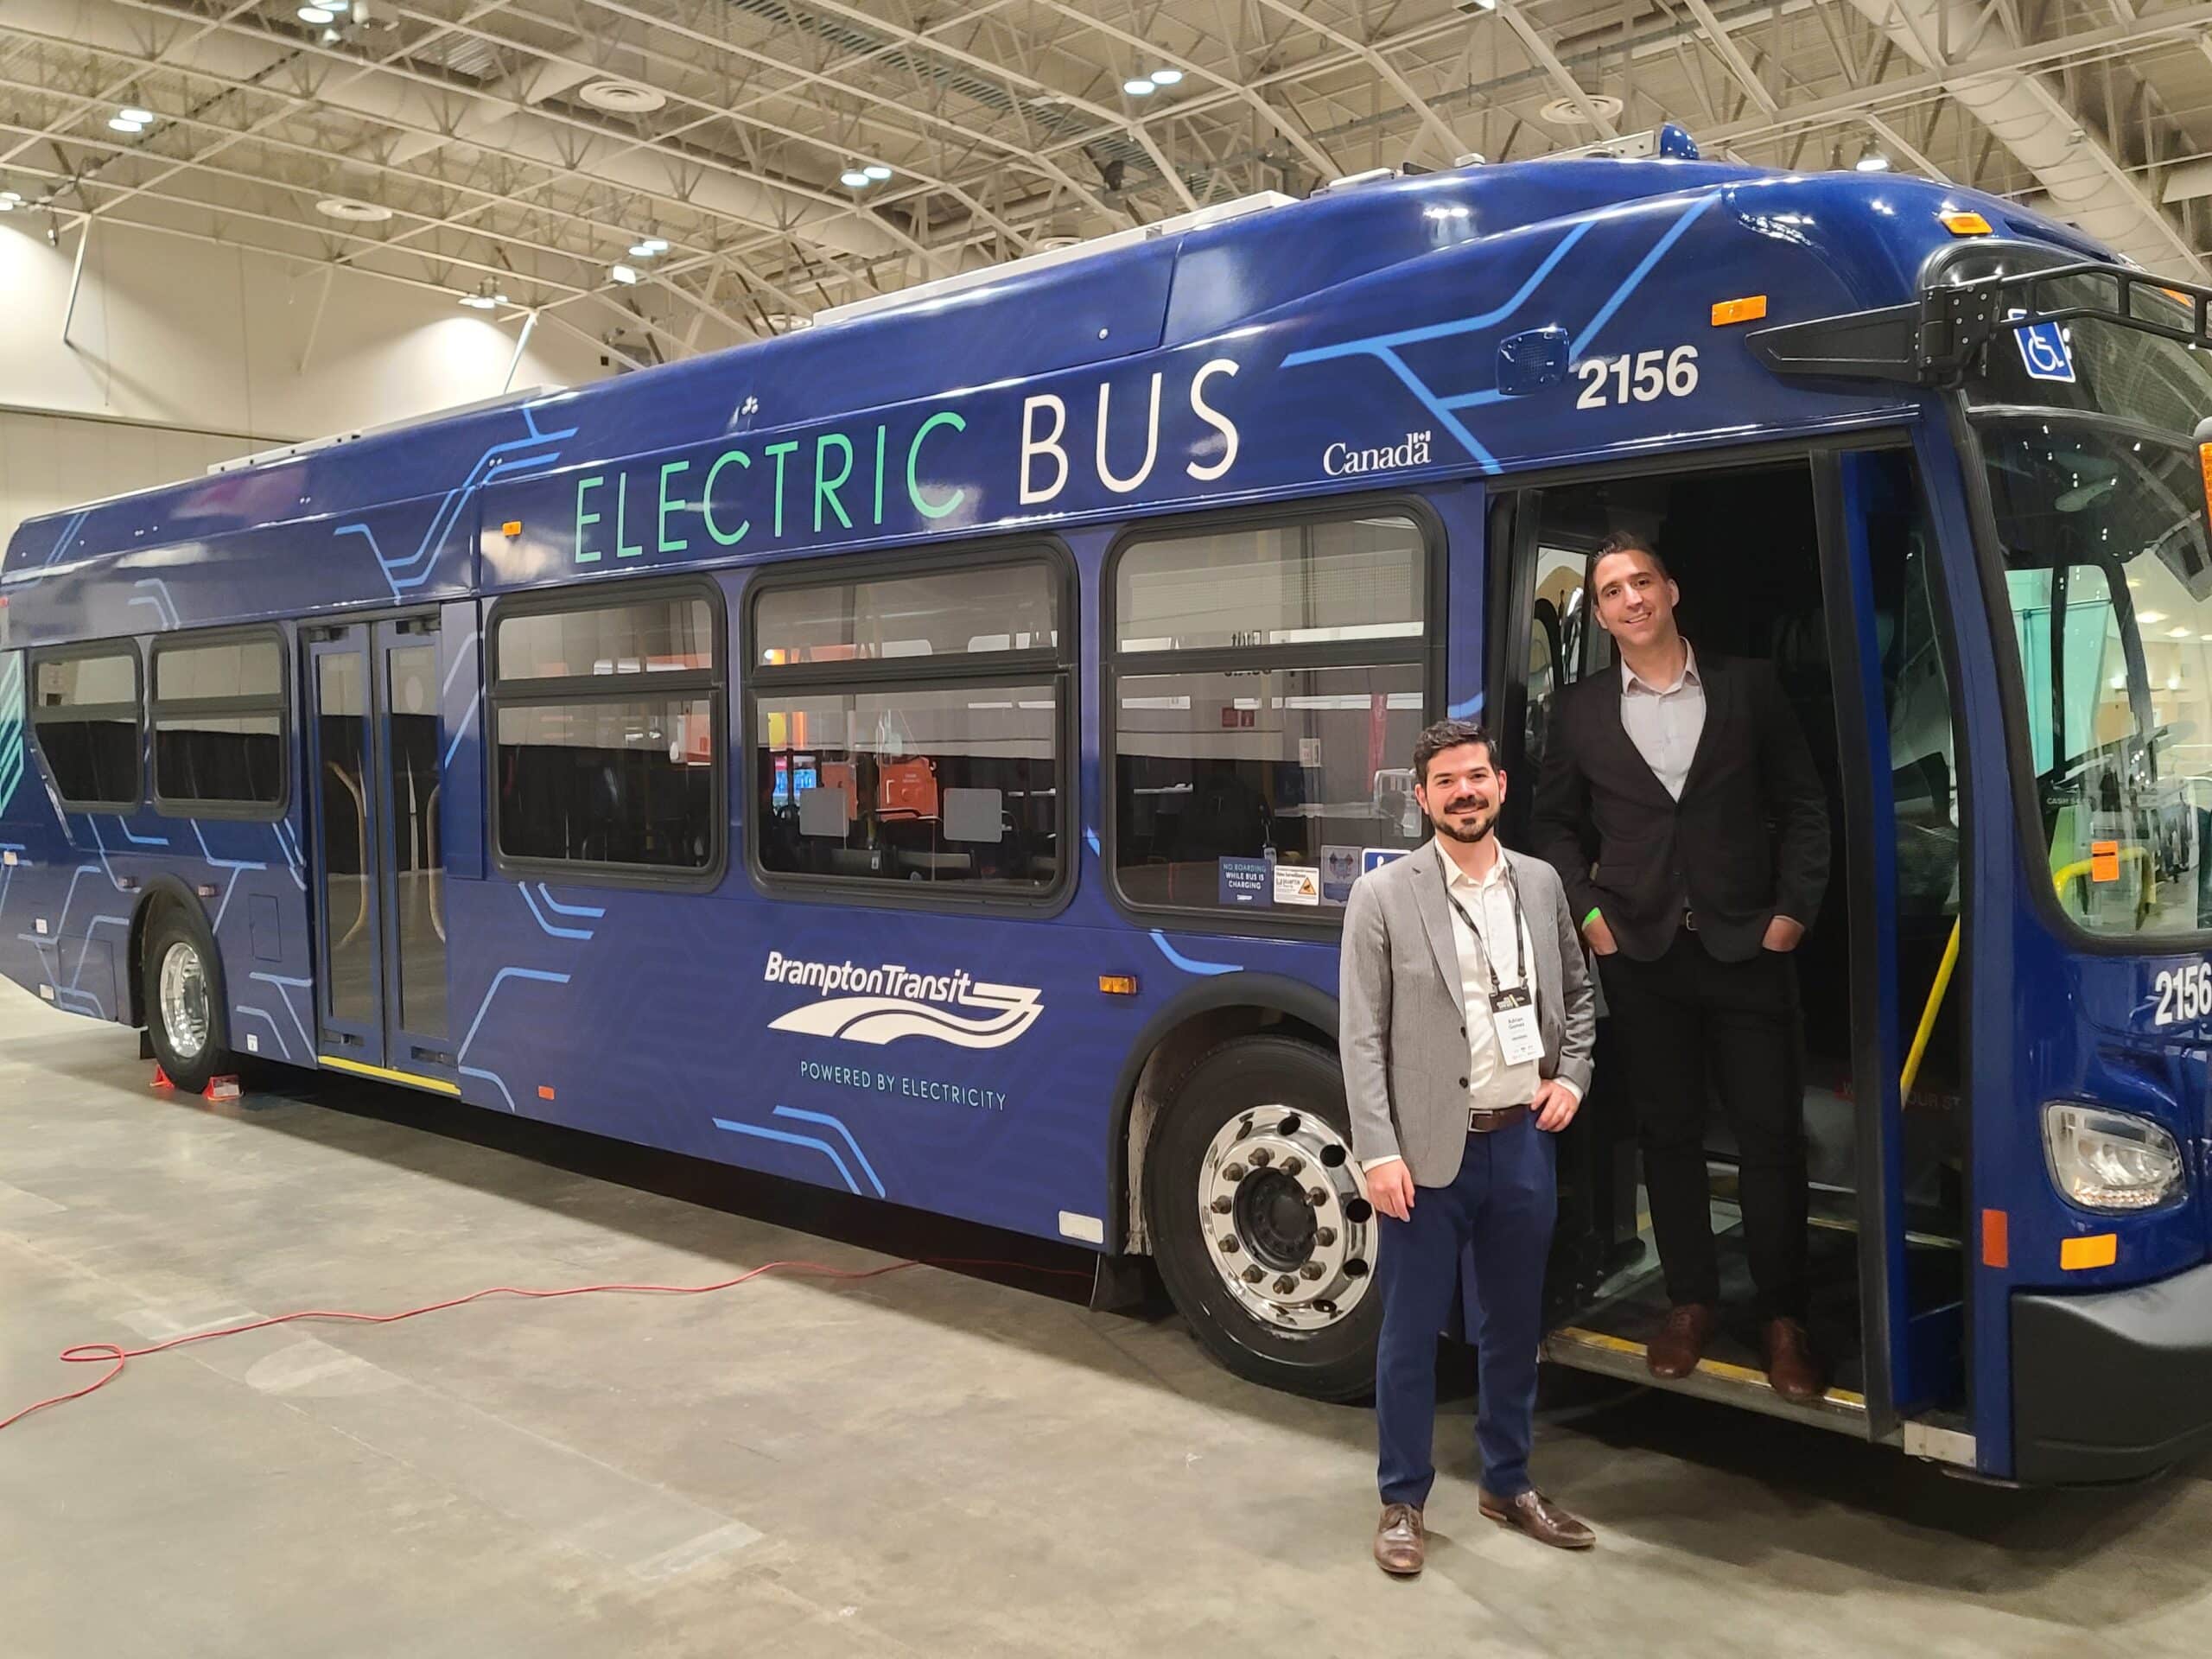 Electric Transport and Sustainability